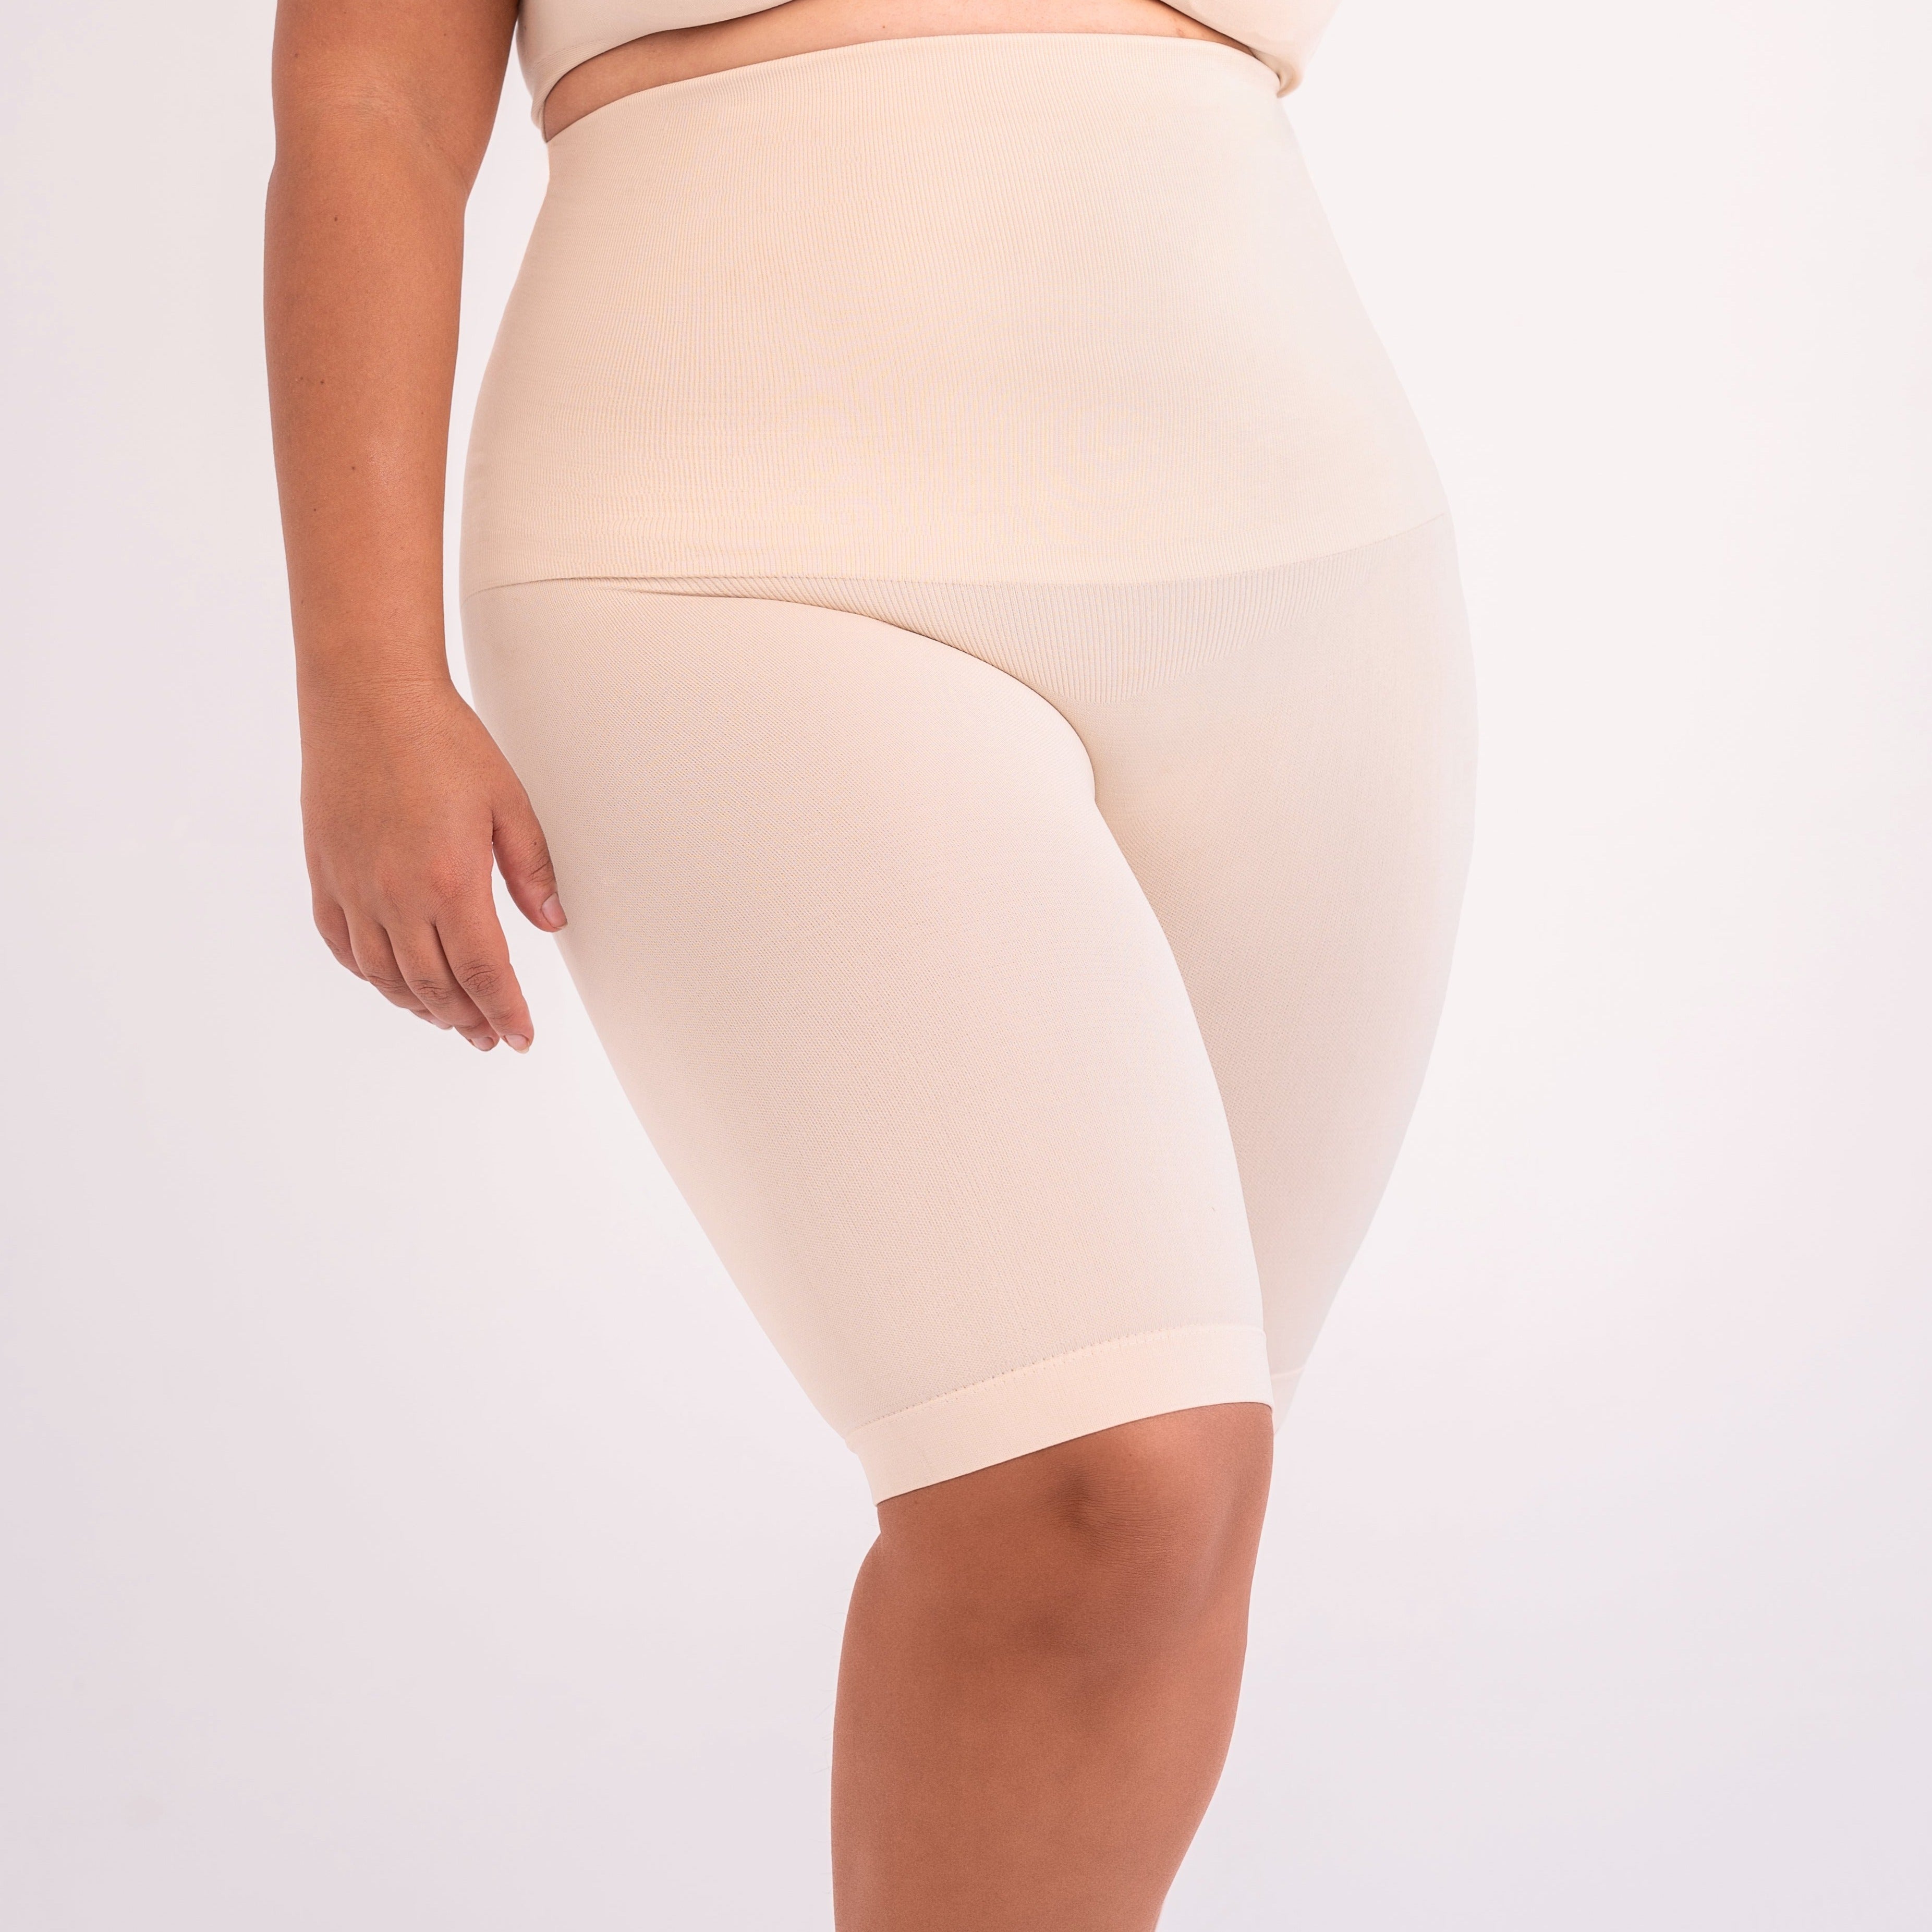 Shapenwear® High Waist Shaper shorts for Everyday use